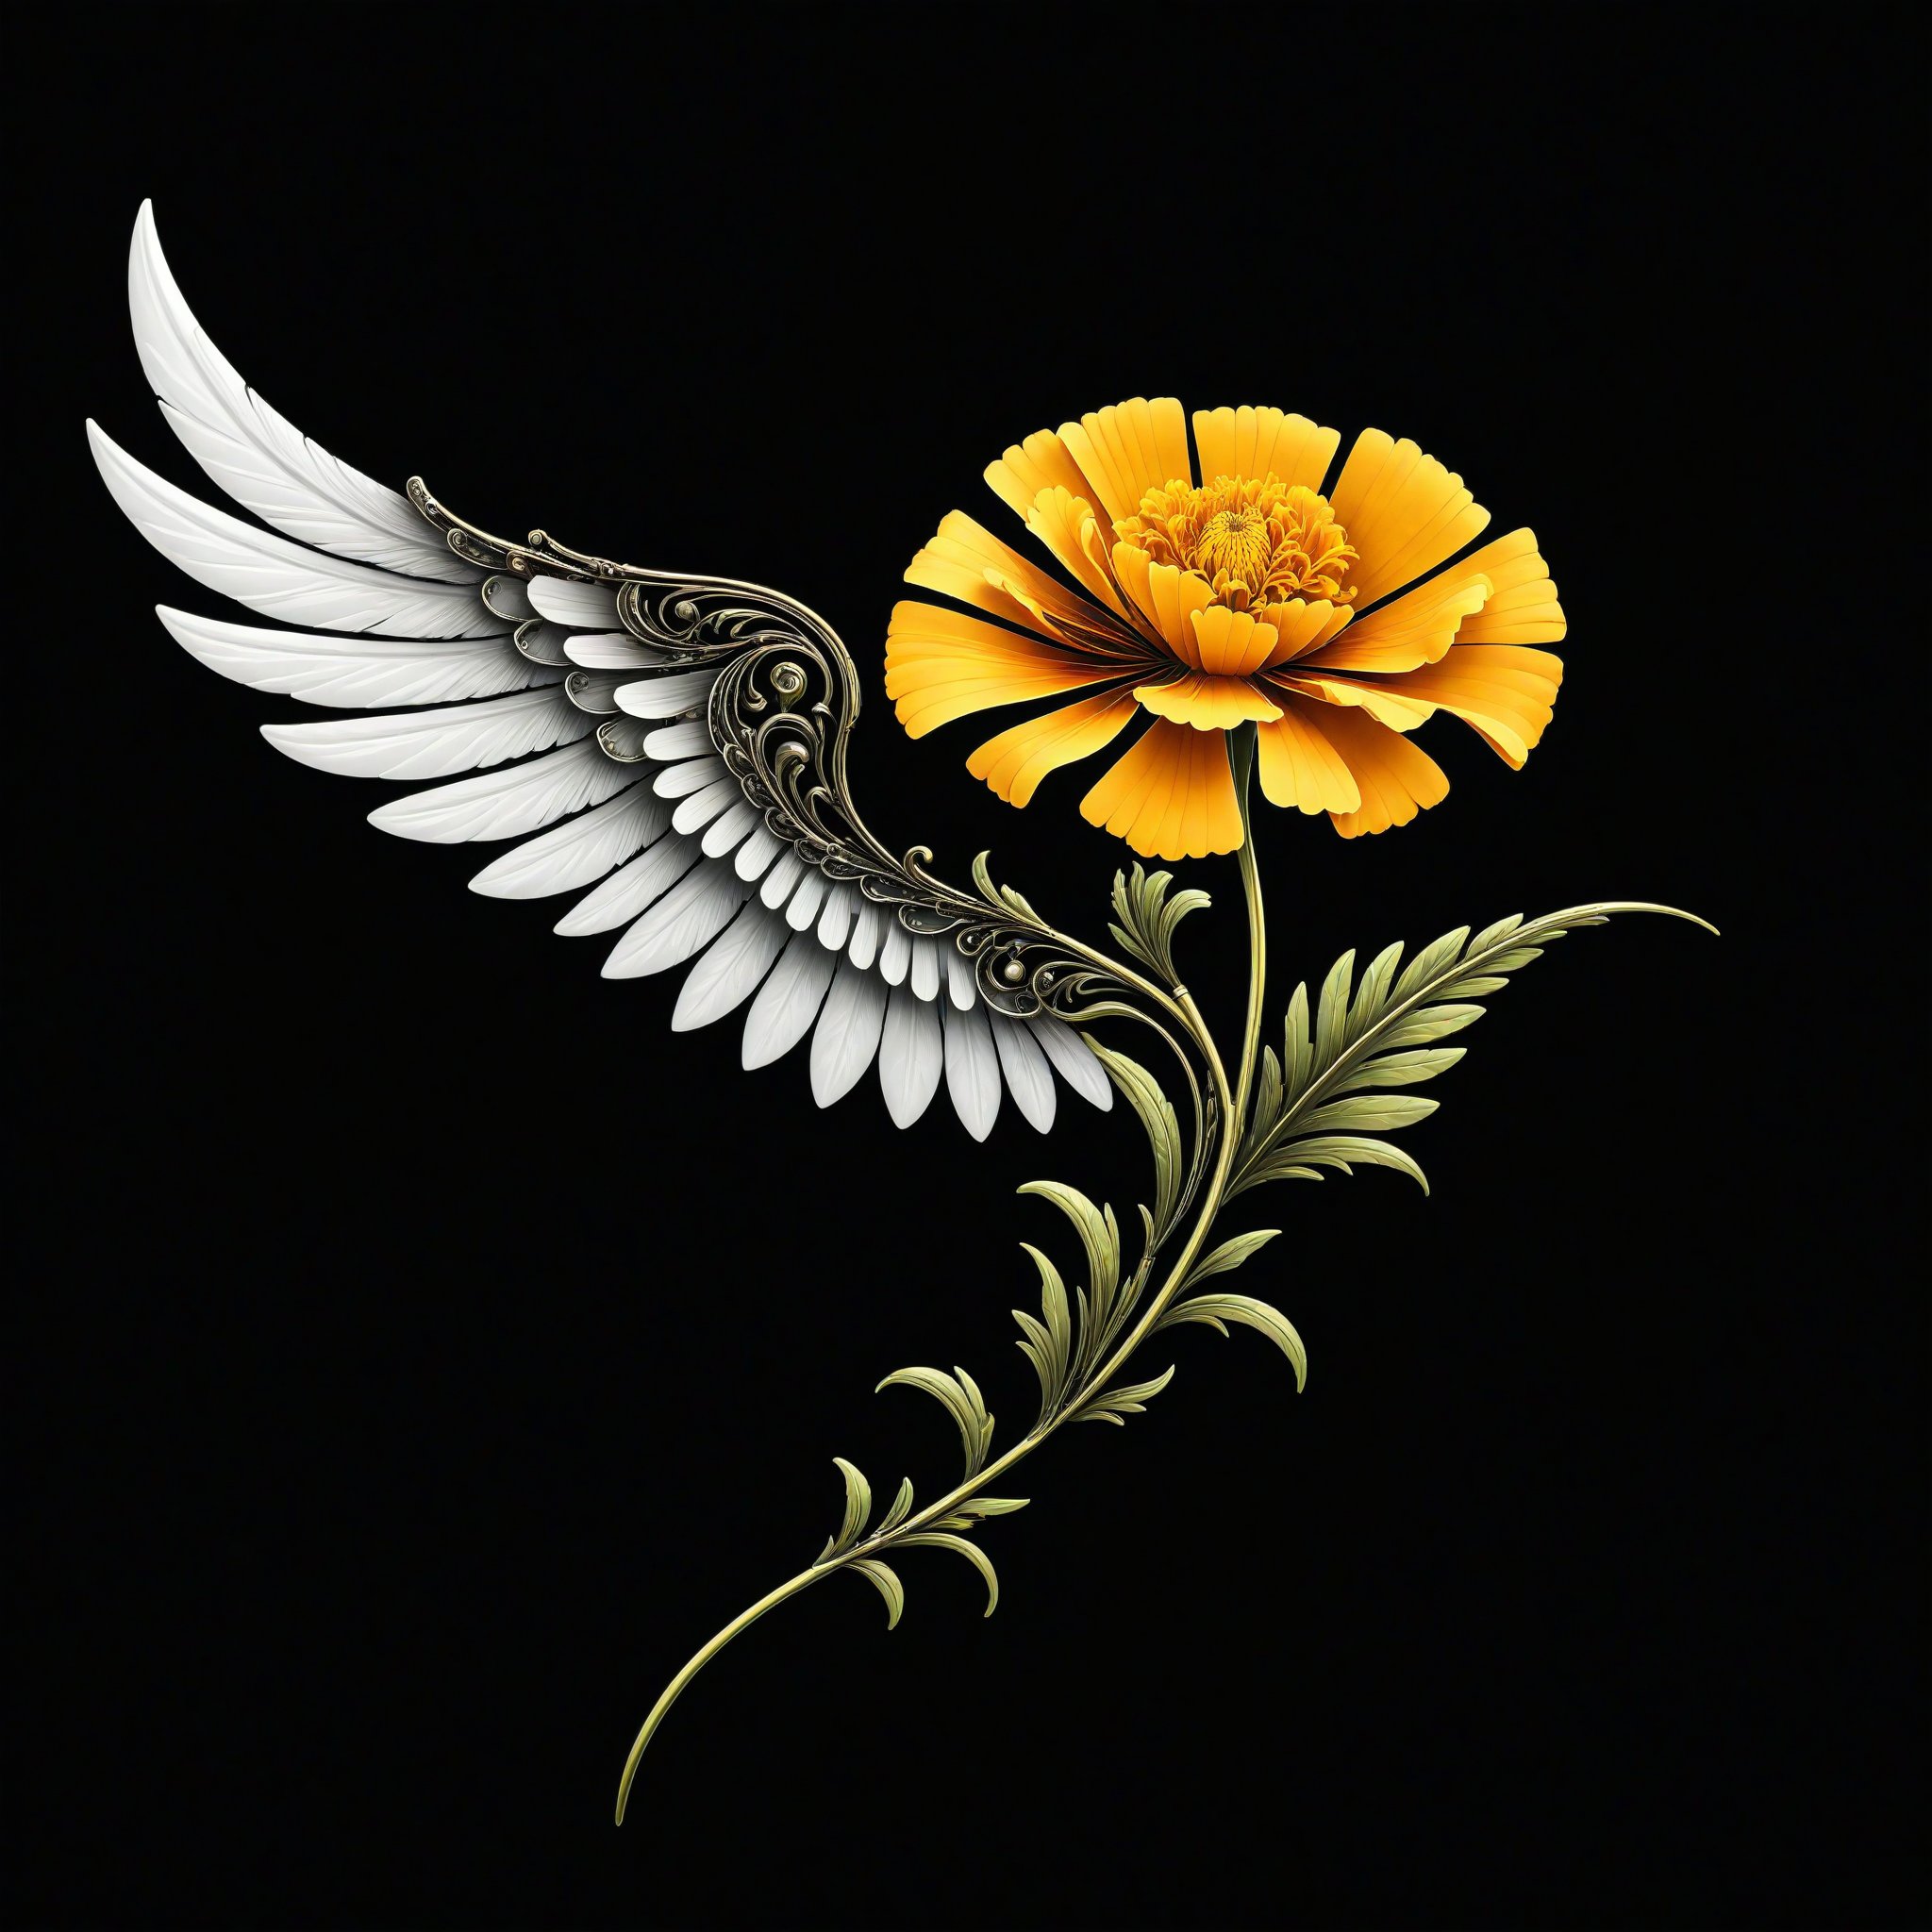 a marigold flower whit wing majestic with clasic ornament Mechanical lines Elegance T-shirt design, BLACK BACKGROUND